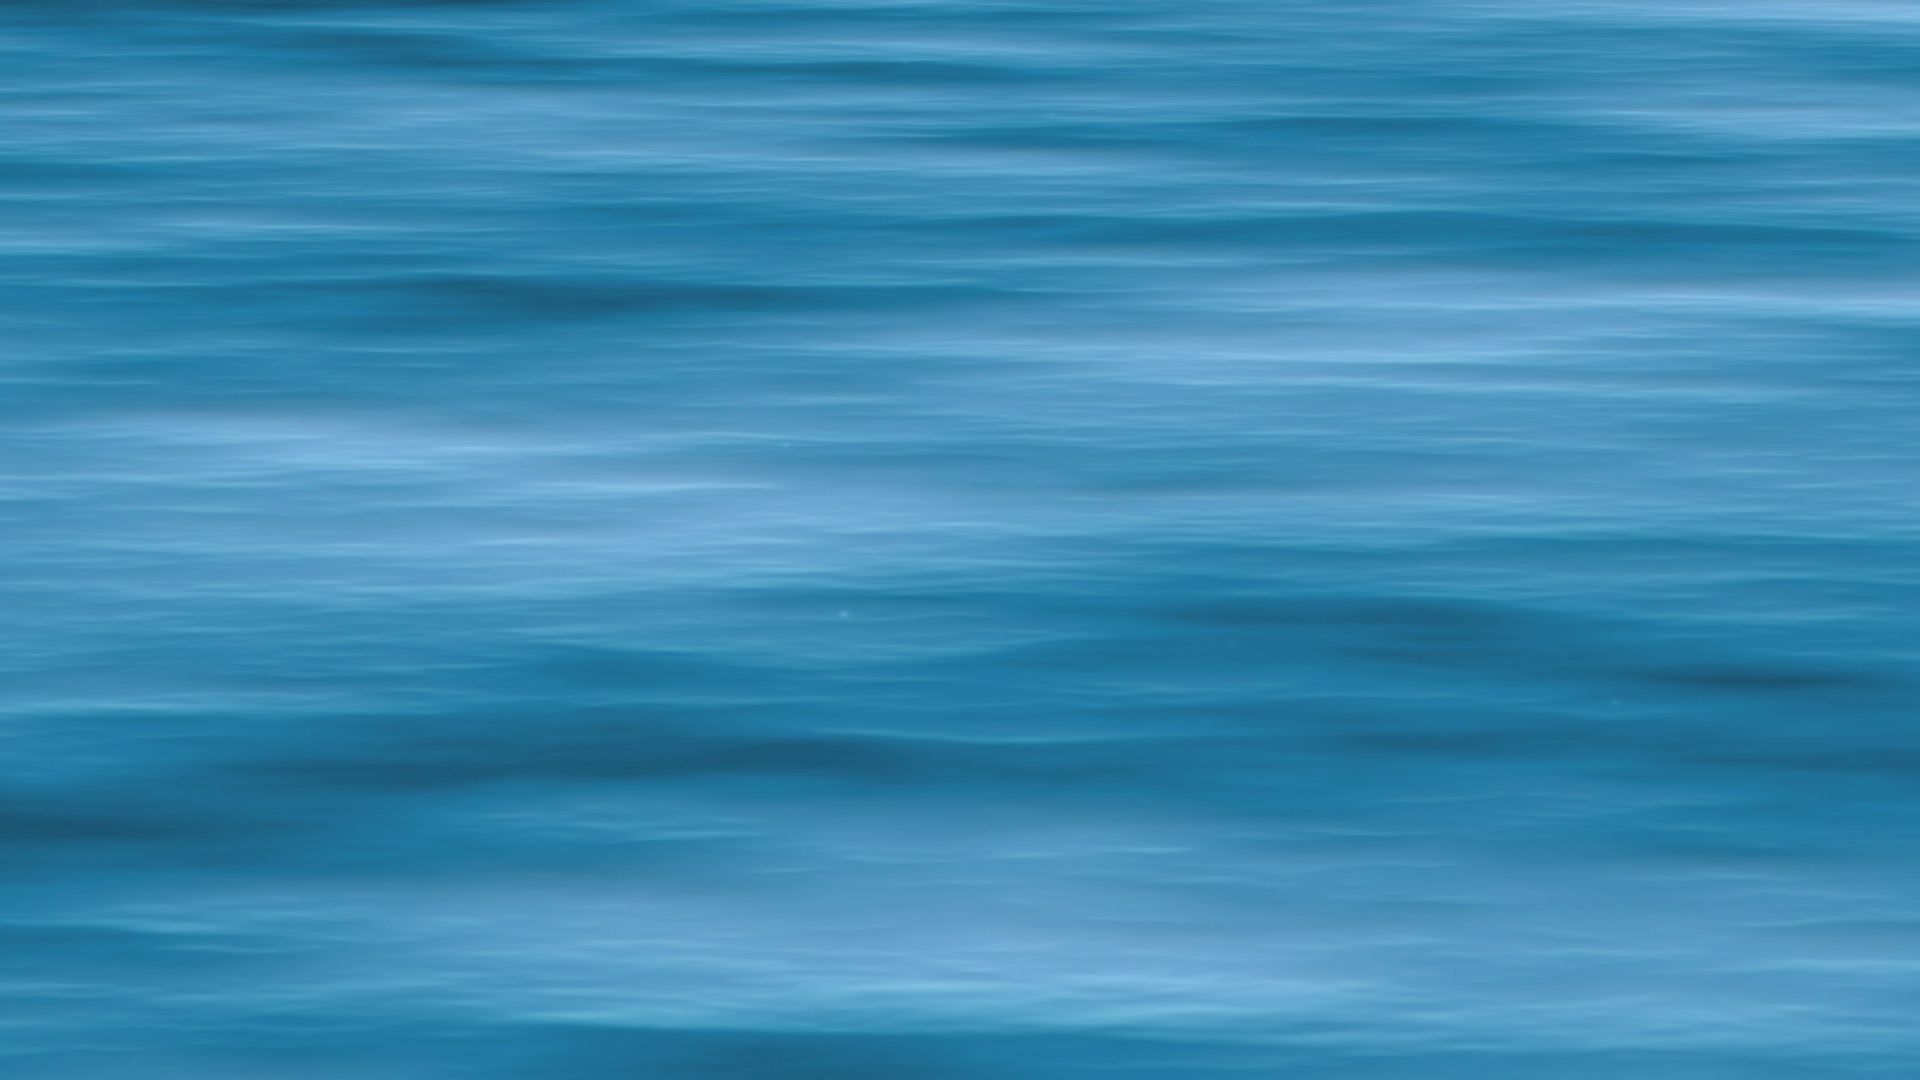 Calm Water 1 | downloops – Creative Motion Backgrounds